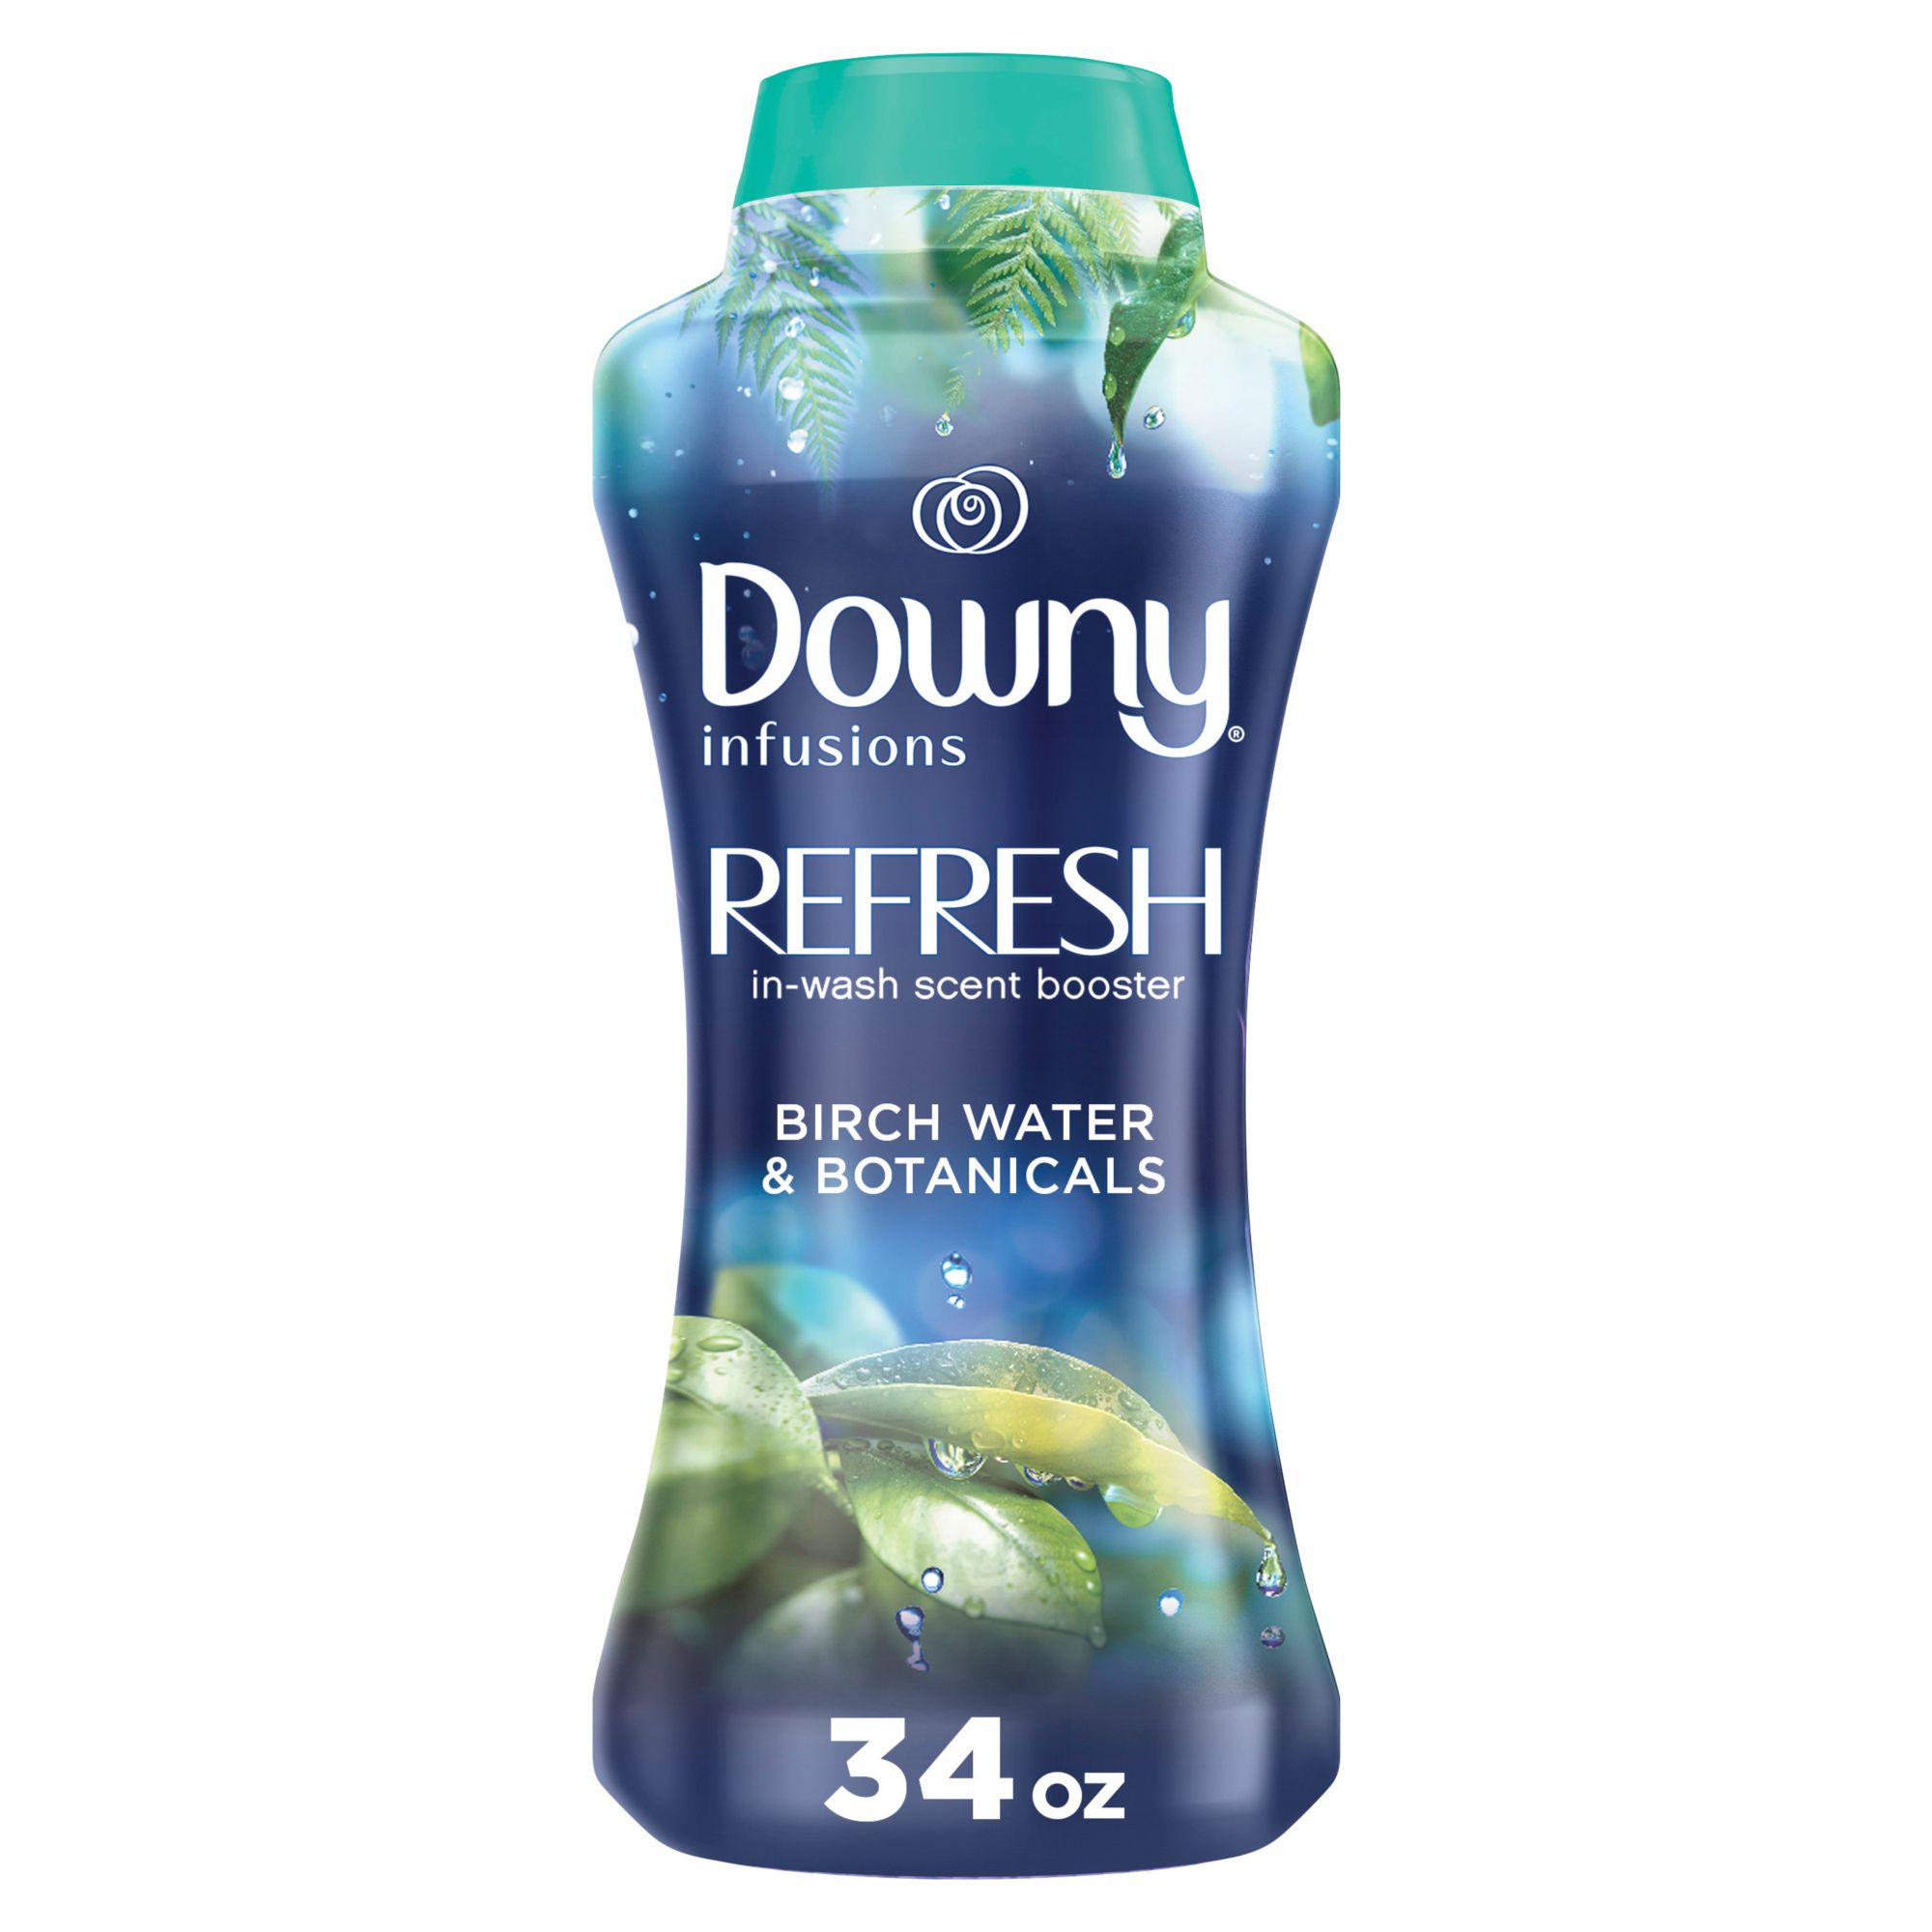 Trying the new downy beads! I absolutely love the smell! Enjoy